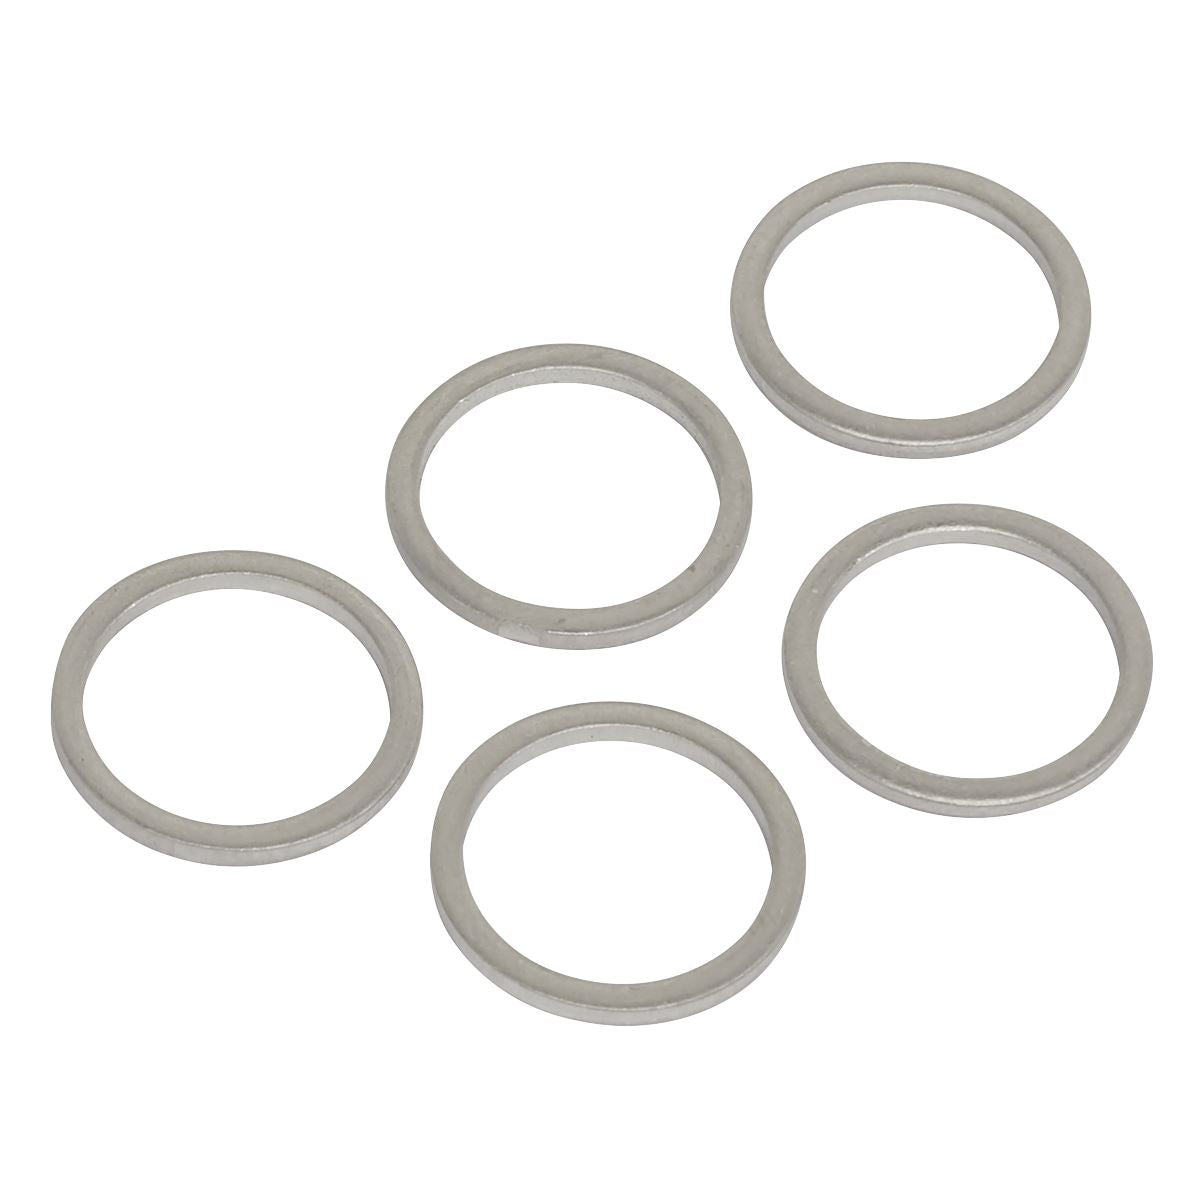 Sealey Sump Plug Washer M15 - Pack of 5